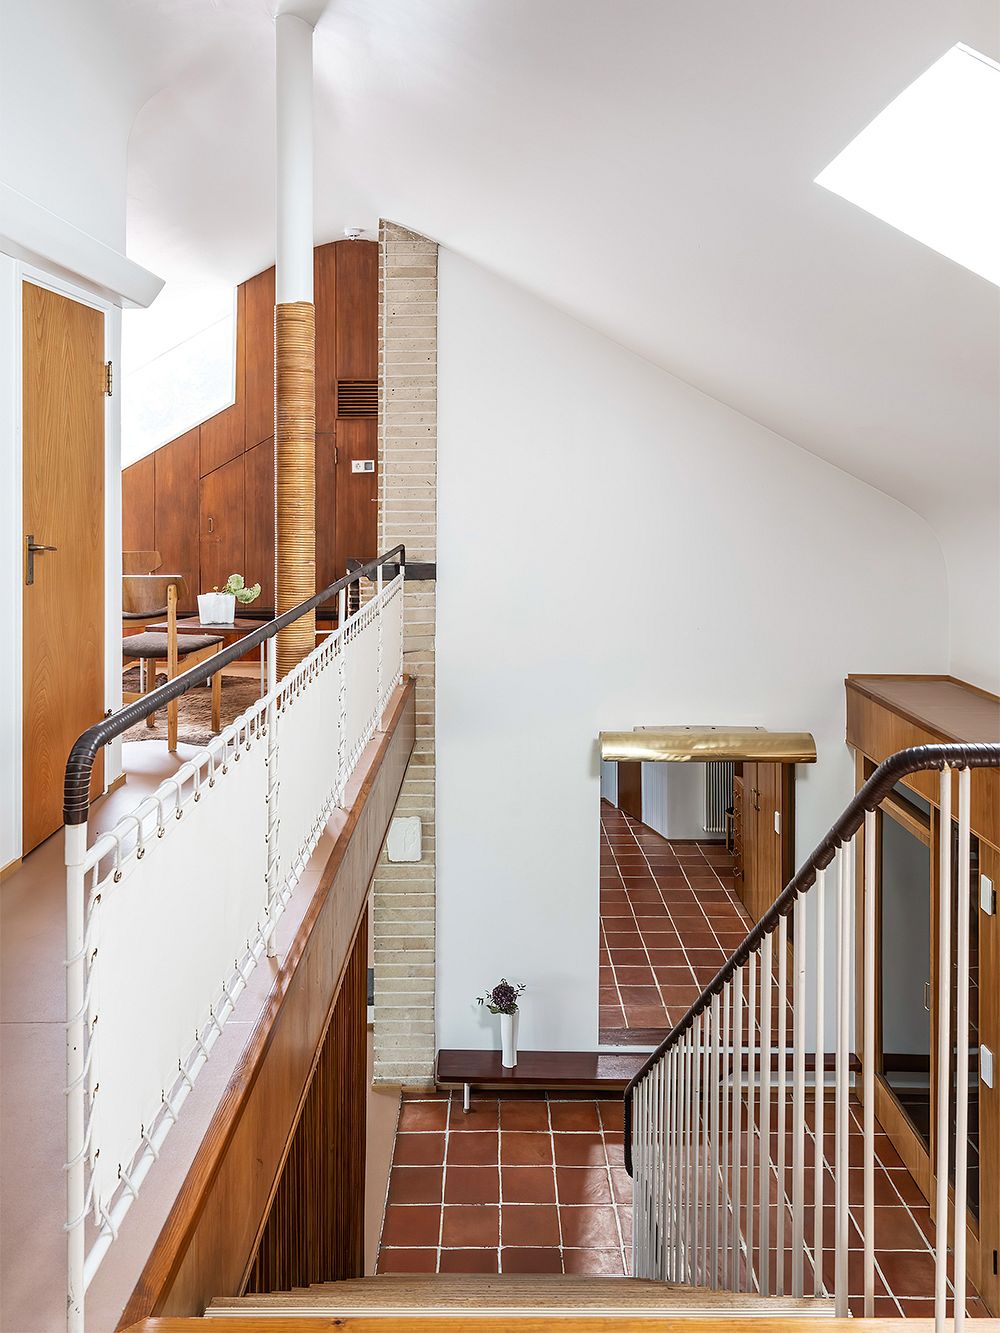 An image featuring Villa Ervi designed by architect Aarne Ervi. The photo shows the interior of the downstairs lobby with a staircase leading downwards.